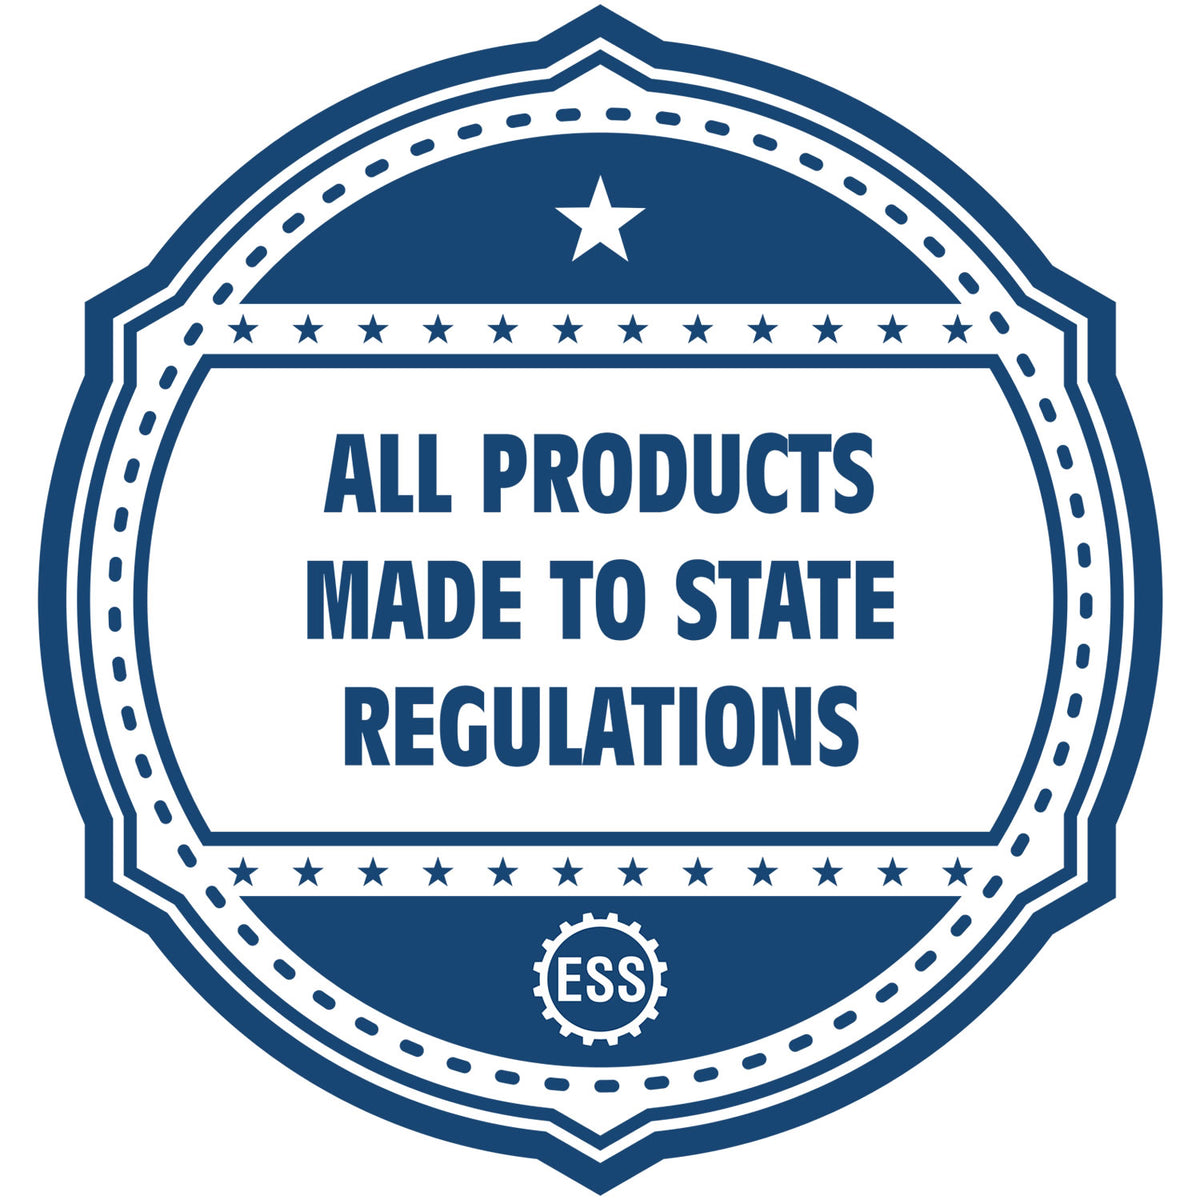 An icon or badge element for the Slim Pre-Inked Virginia Landscape Architect Seal Stamp showing that this product is made in compliance with state regulations.